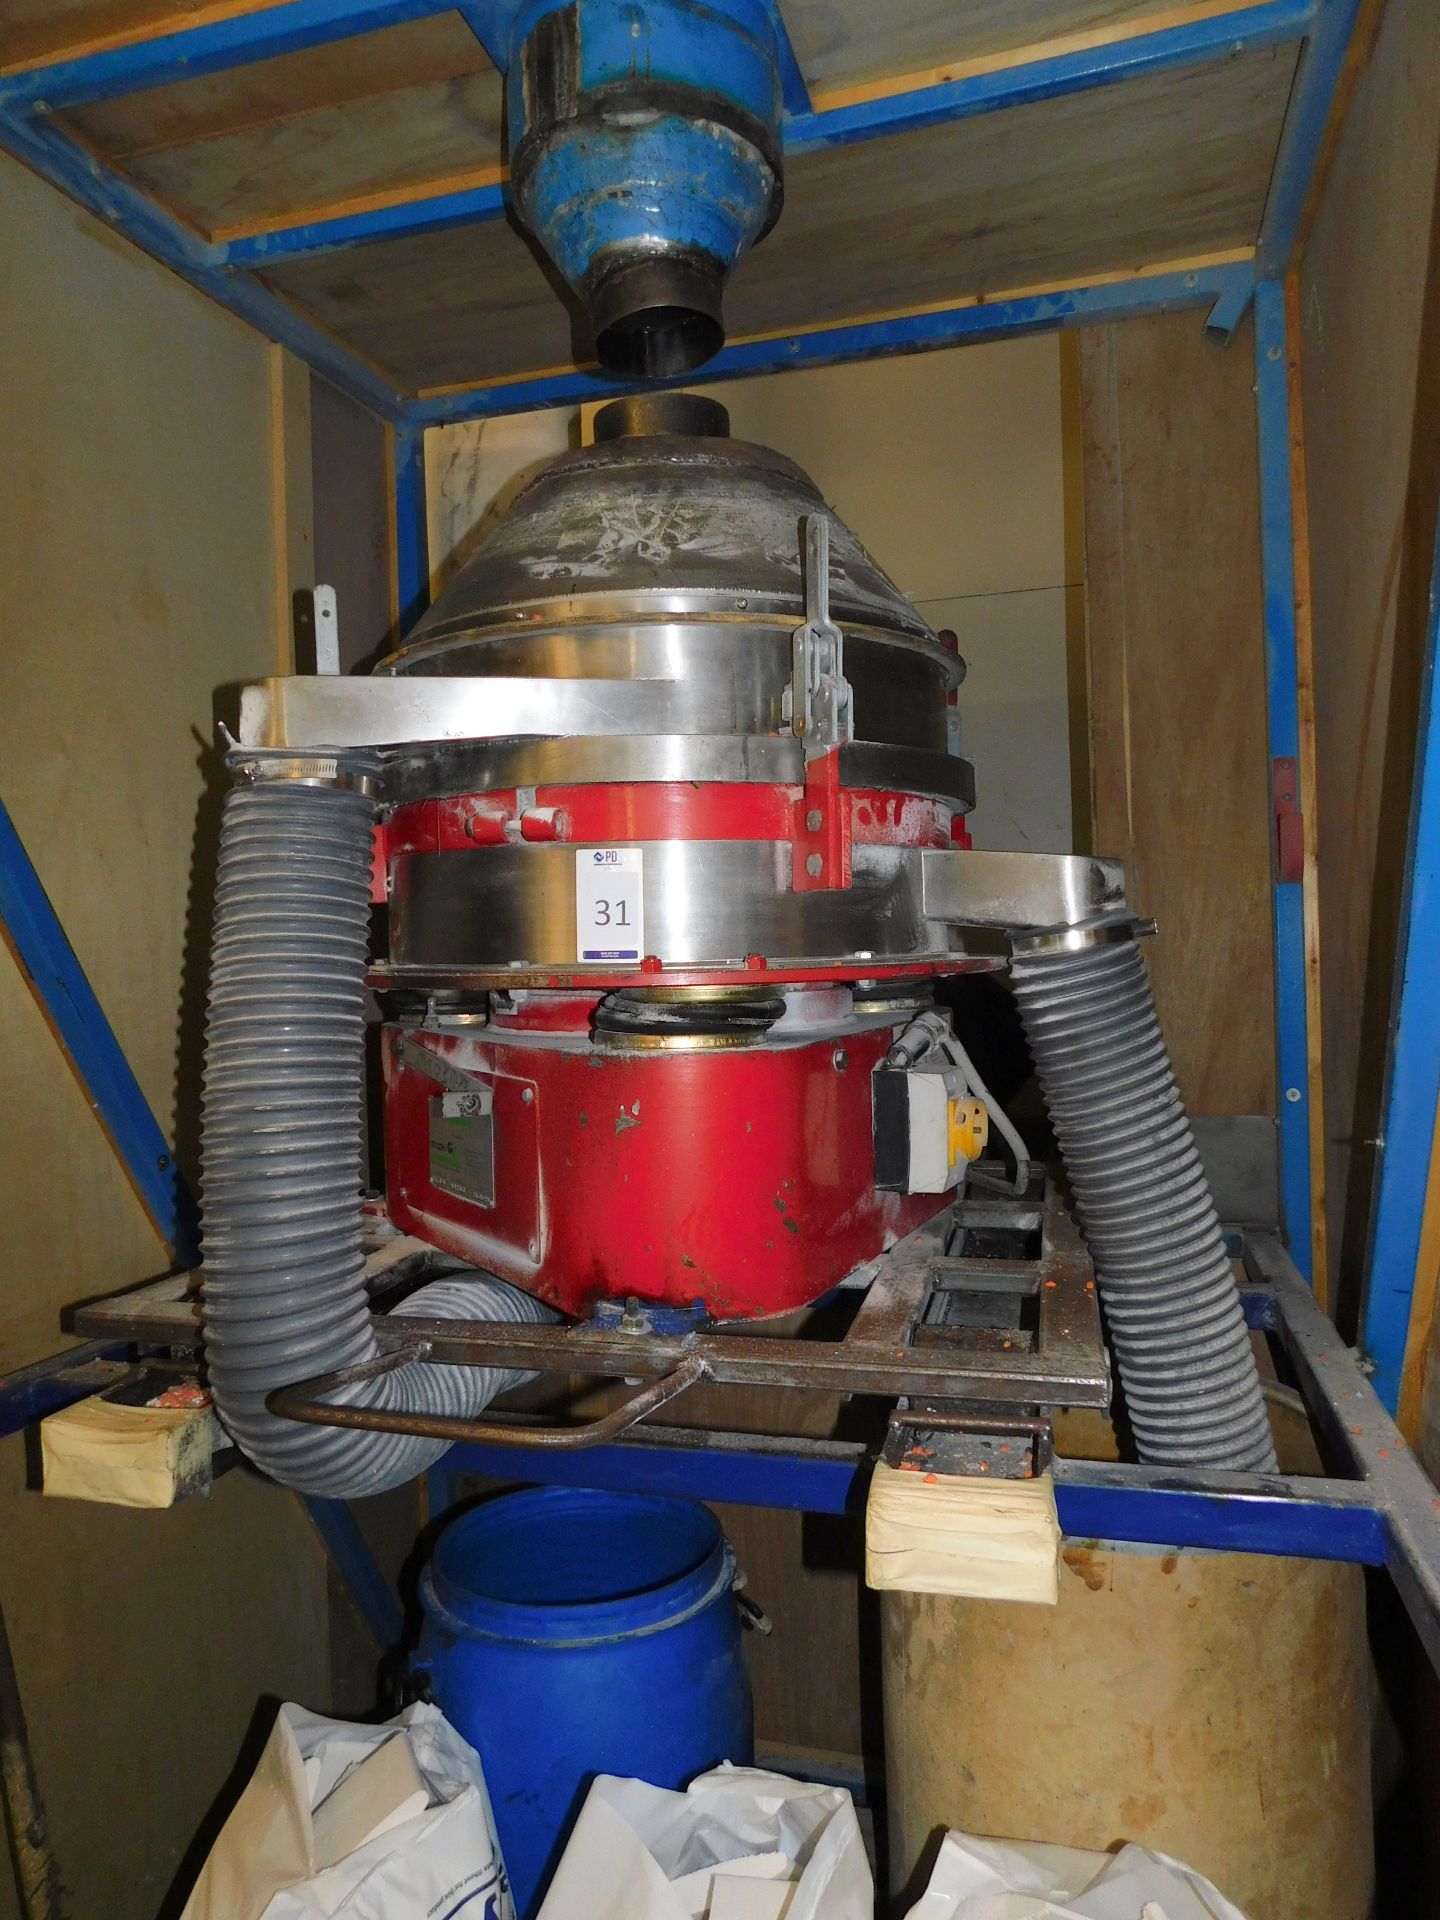 Gough Vibrecon GV.2.1 Vibratory Sive/Separator, Serial Number: 012344 (Collection by agreement but - Image 2 of 2